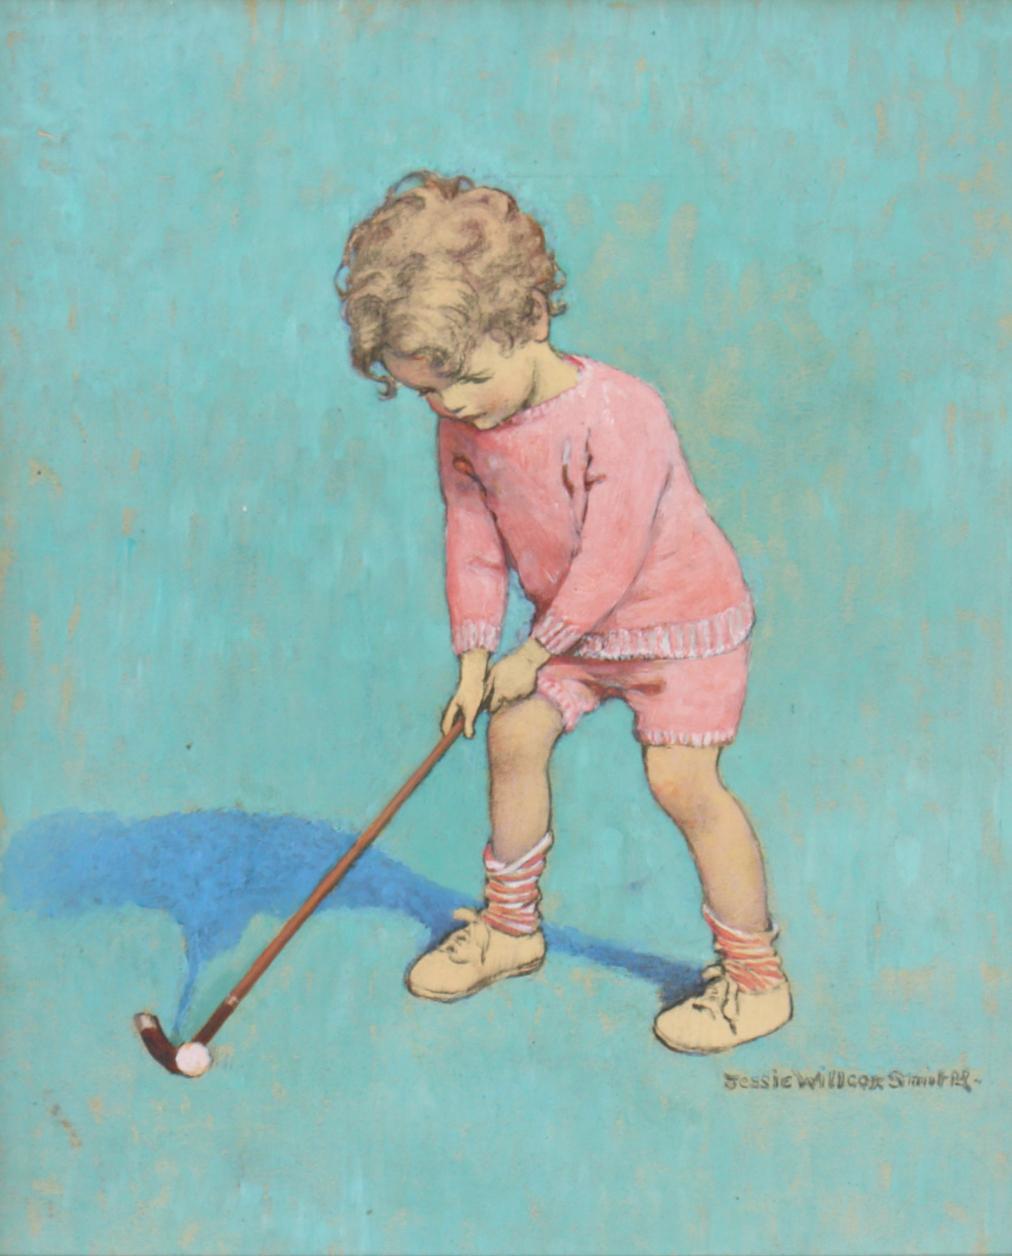 Good Housekeeping Cover, The Little Golfer - Painting by Jessie Willcox Smith